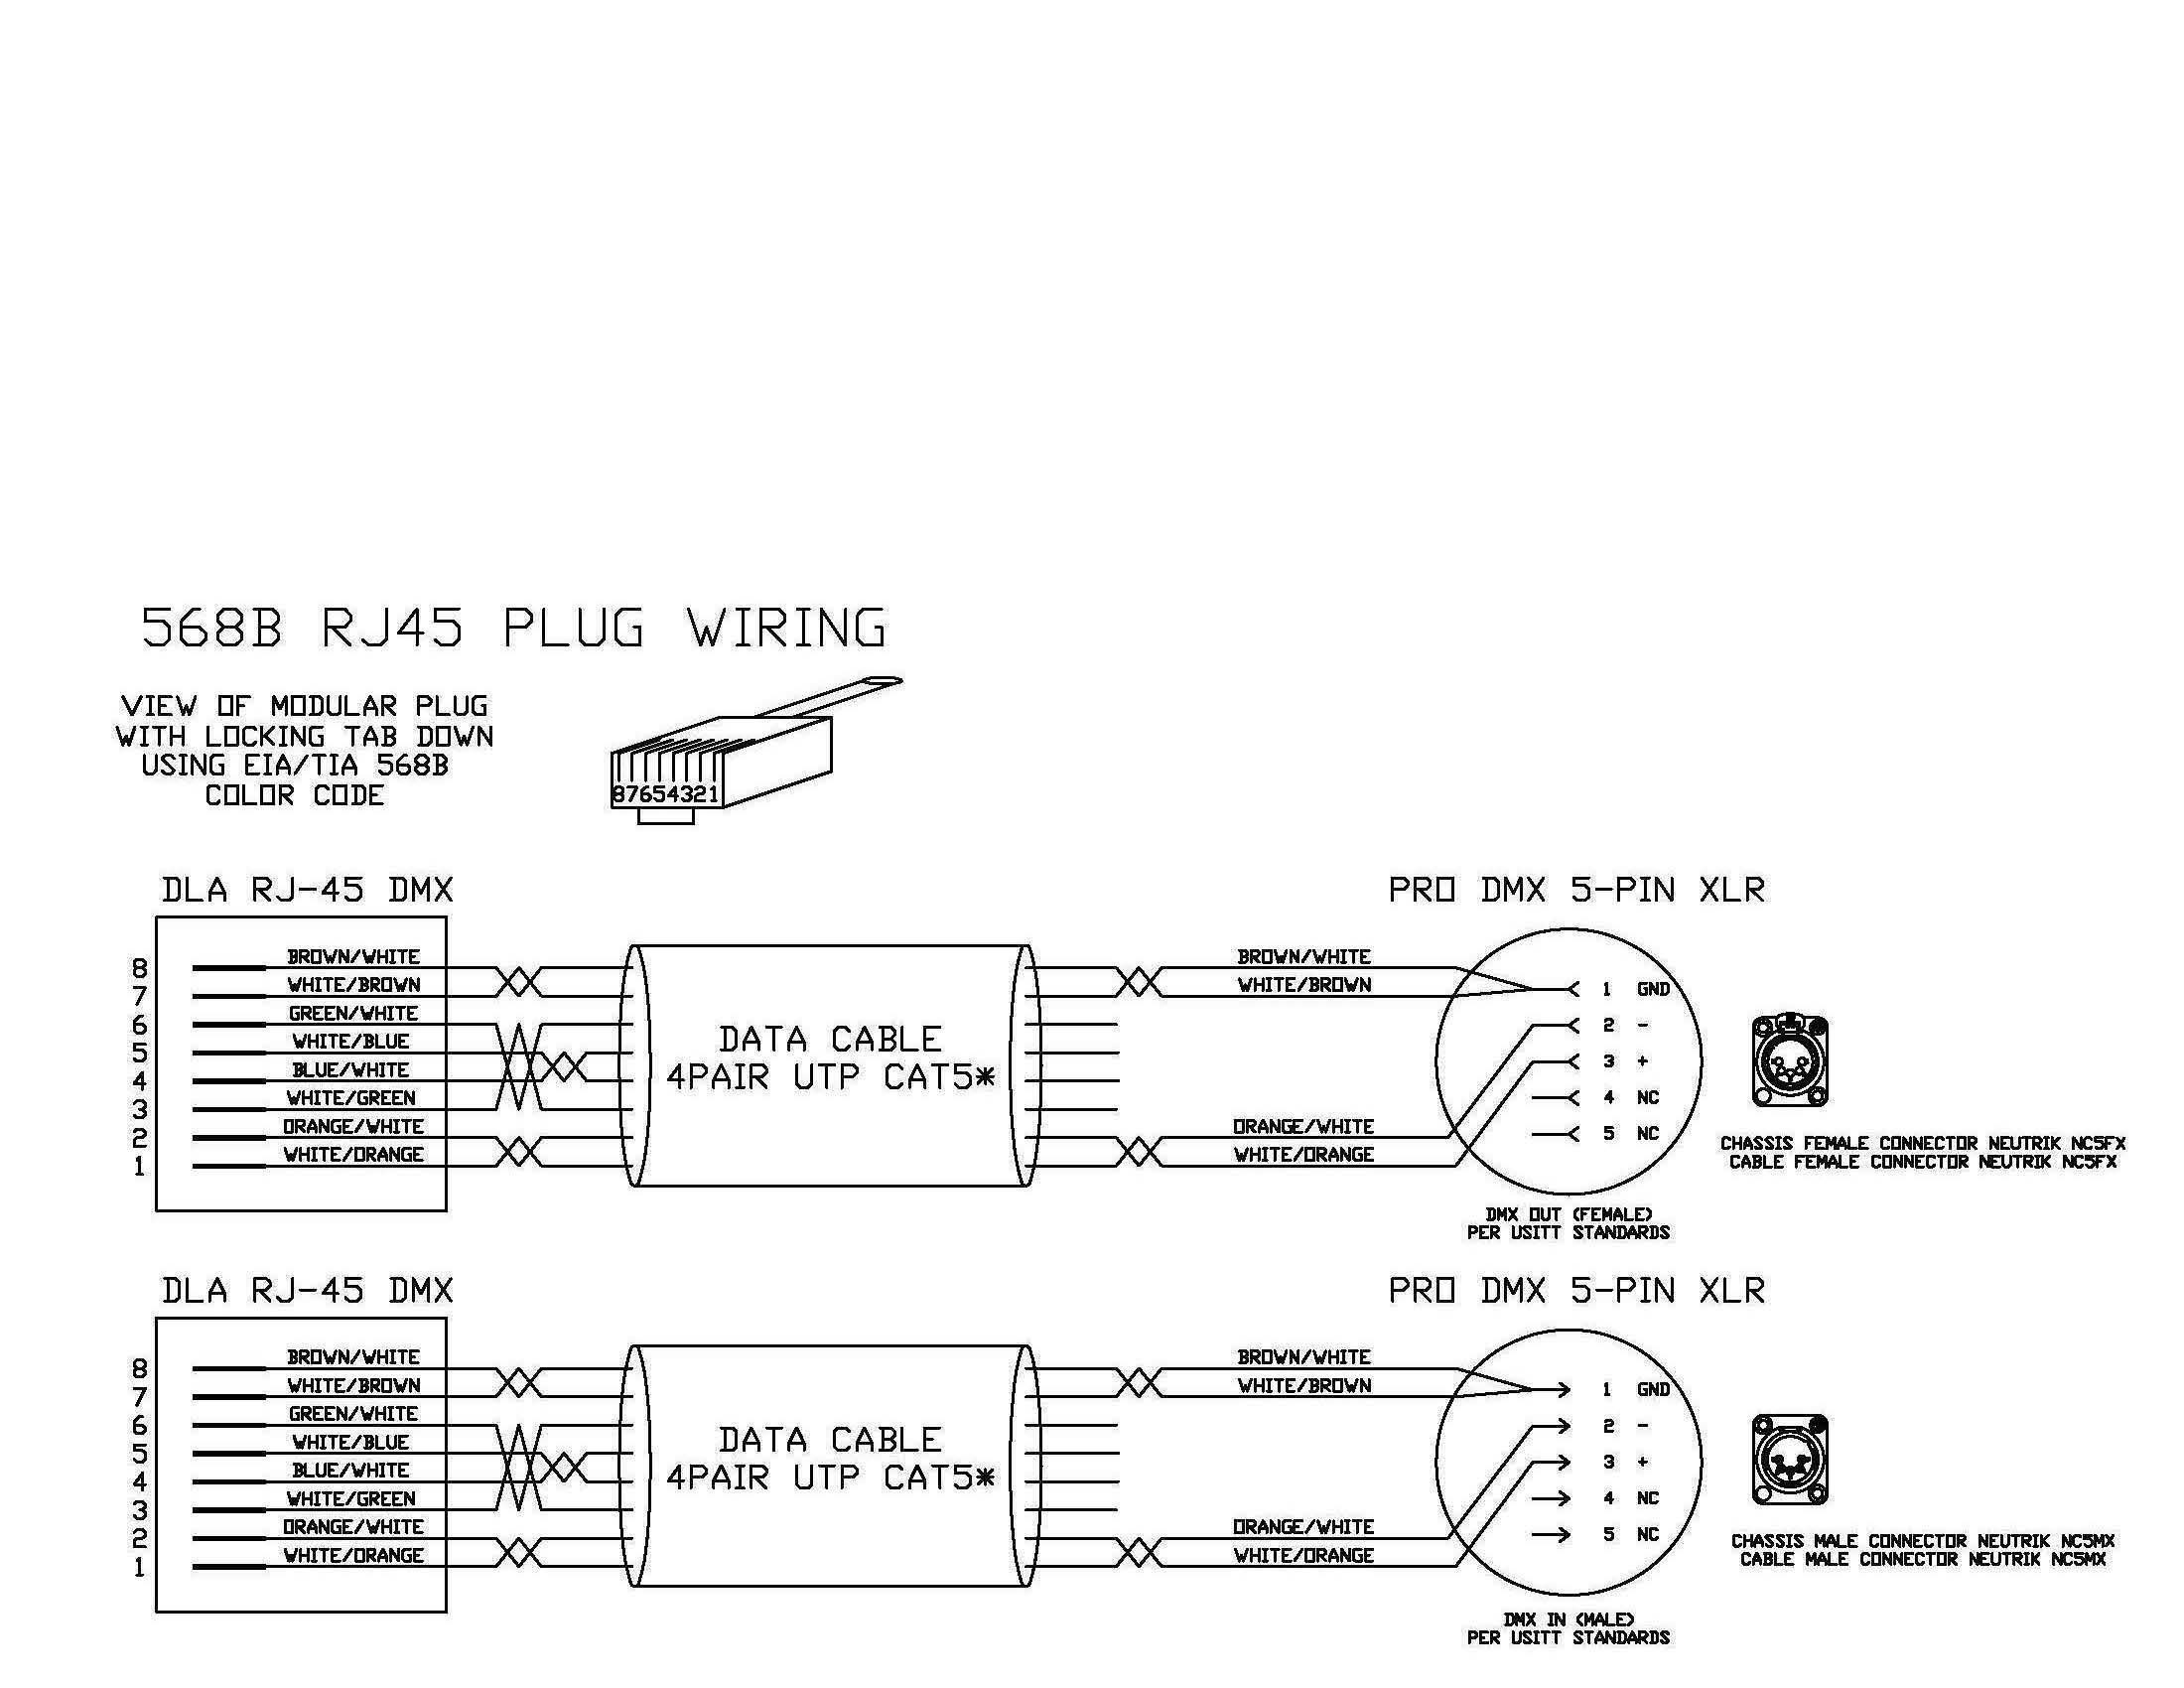 Wiring Diagram for Xlr Connector Inspirationa Xlr to Rj45 Wiring Diagram Xlr Electrical Wiring Diagrams